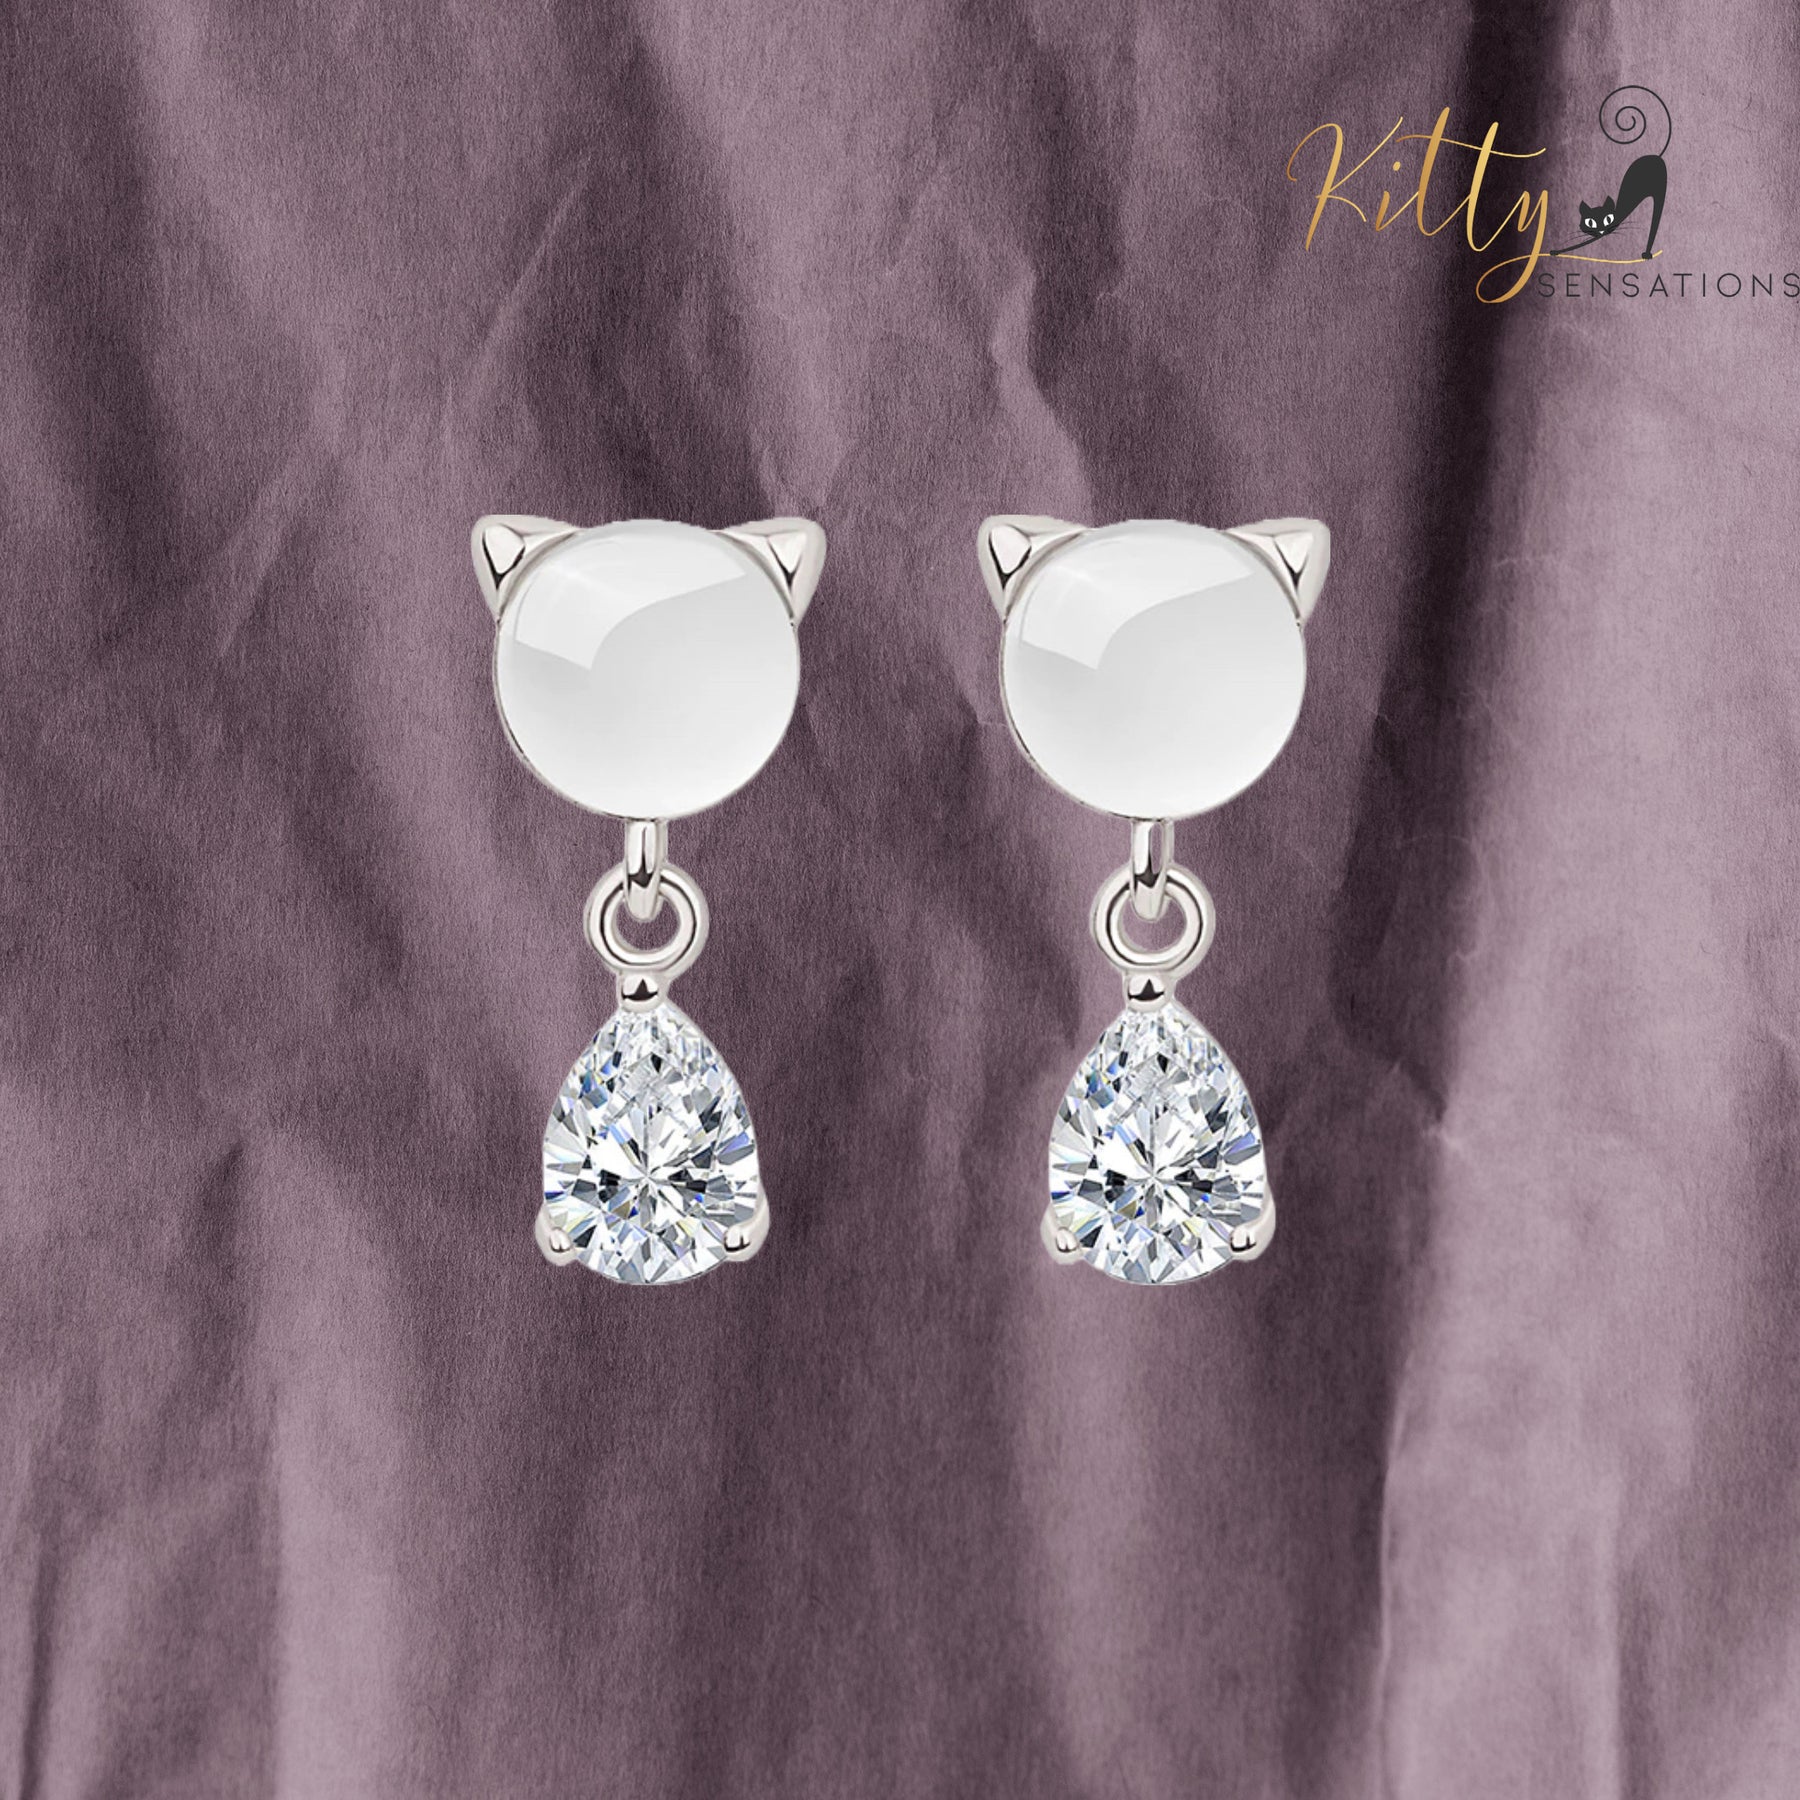 www.KittySensations.com Natural Chalcedony Kitty Stud and Drop Earrings in Solid 925 Sterling Silver ($27.97): https://www.kittysensations.com/products/natural-chalcedony-cat-stud-and-drop-earrings-in-solid-925-sterling-silver